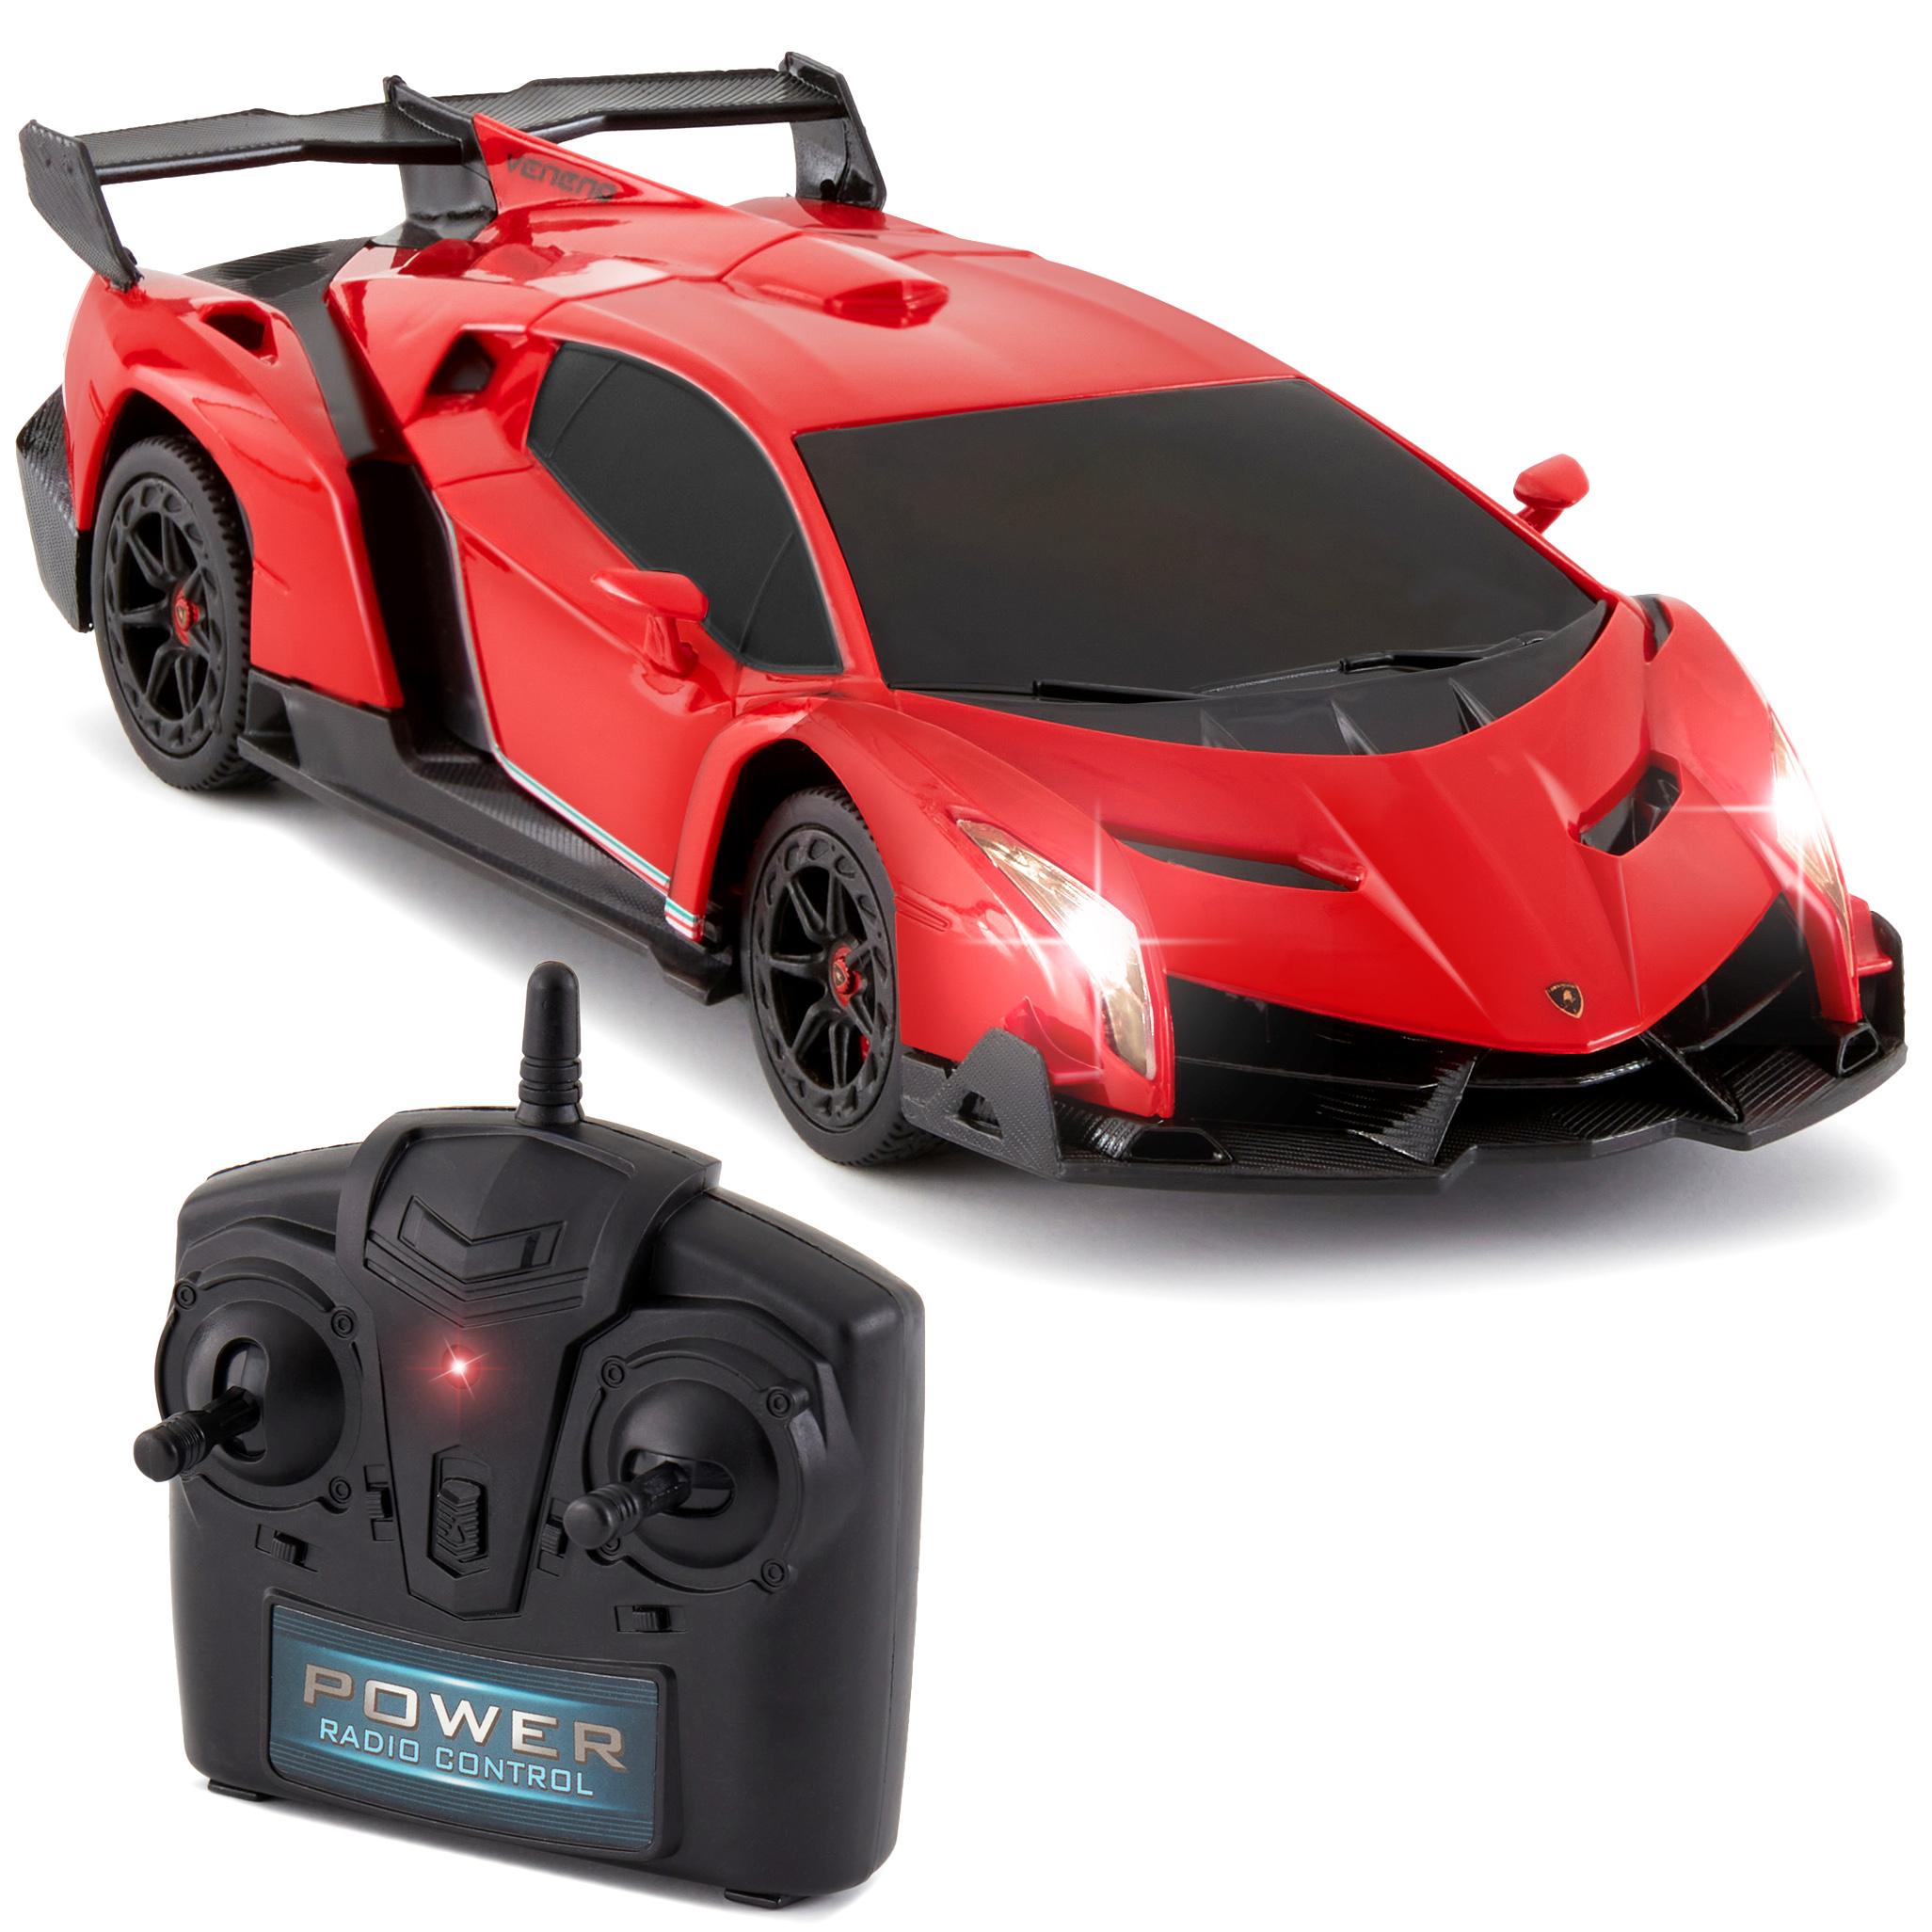 Best Choice Products 1/24 Officially Licensed RC Lamborghini Veneno Sport Racing Car w/ 2.4GHz Remote Control - Red - image 1 of 6